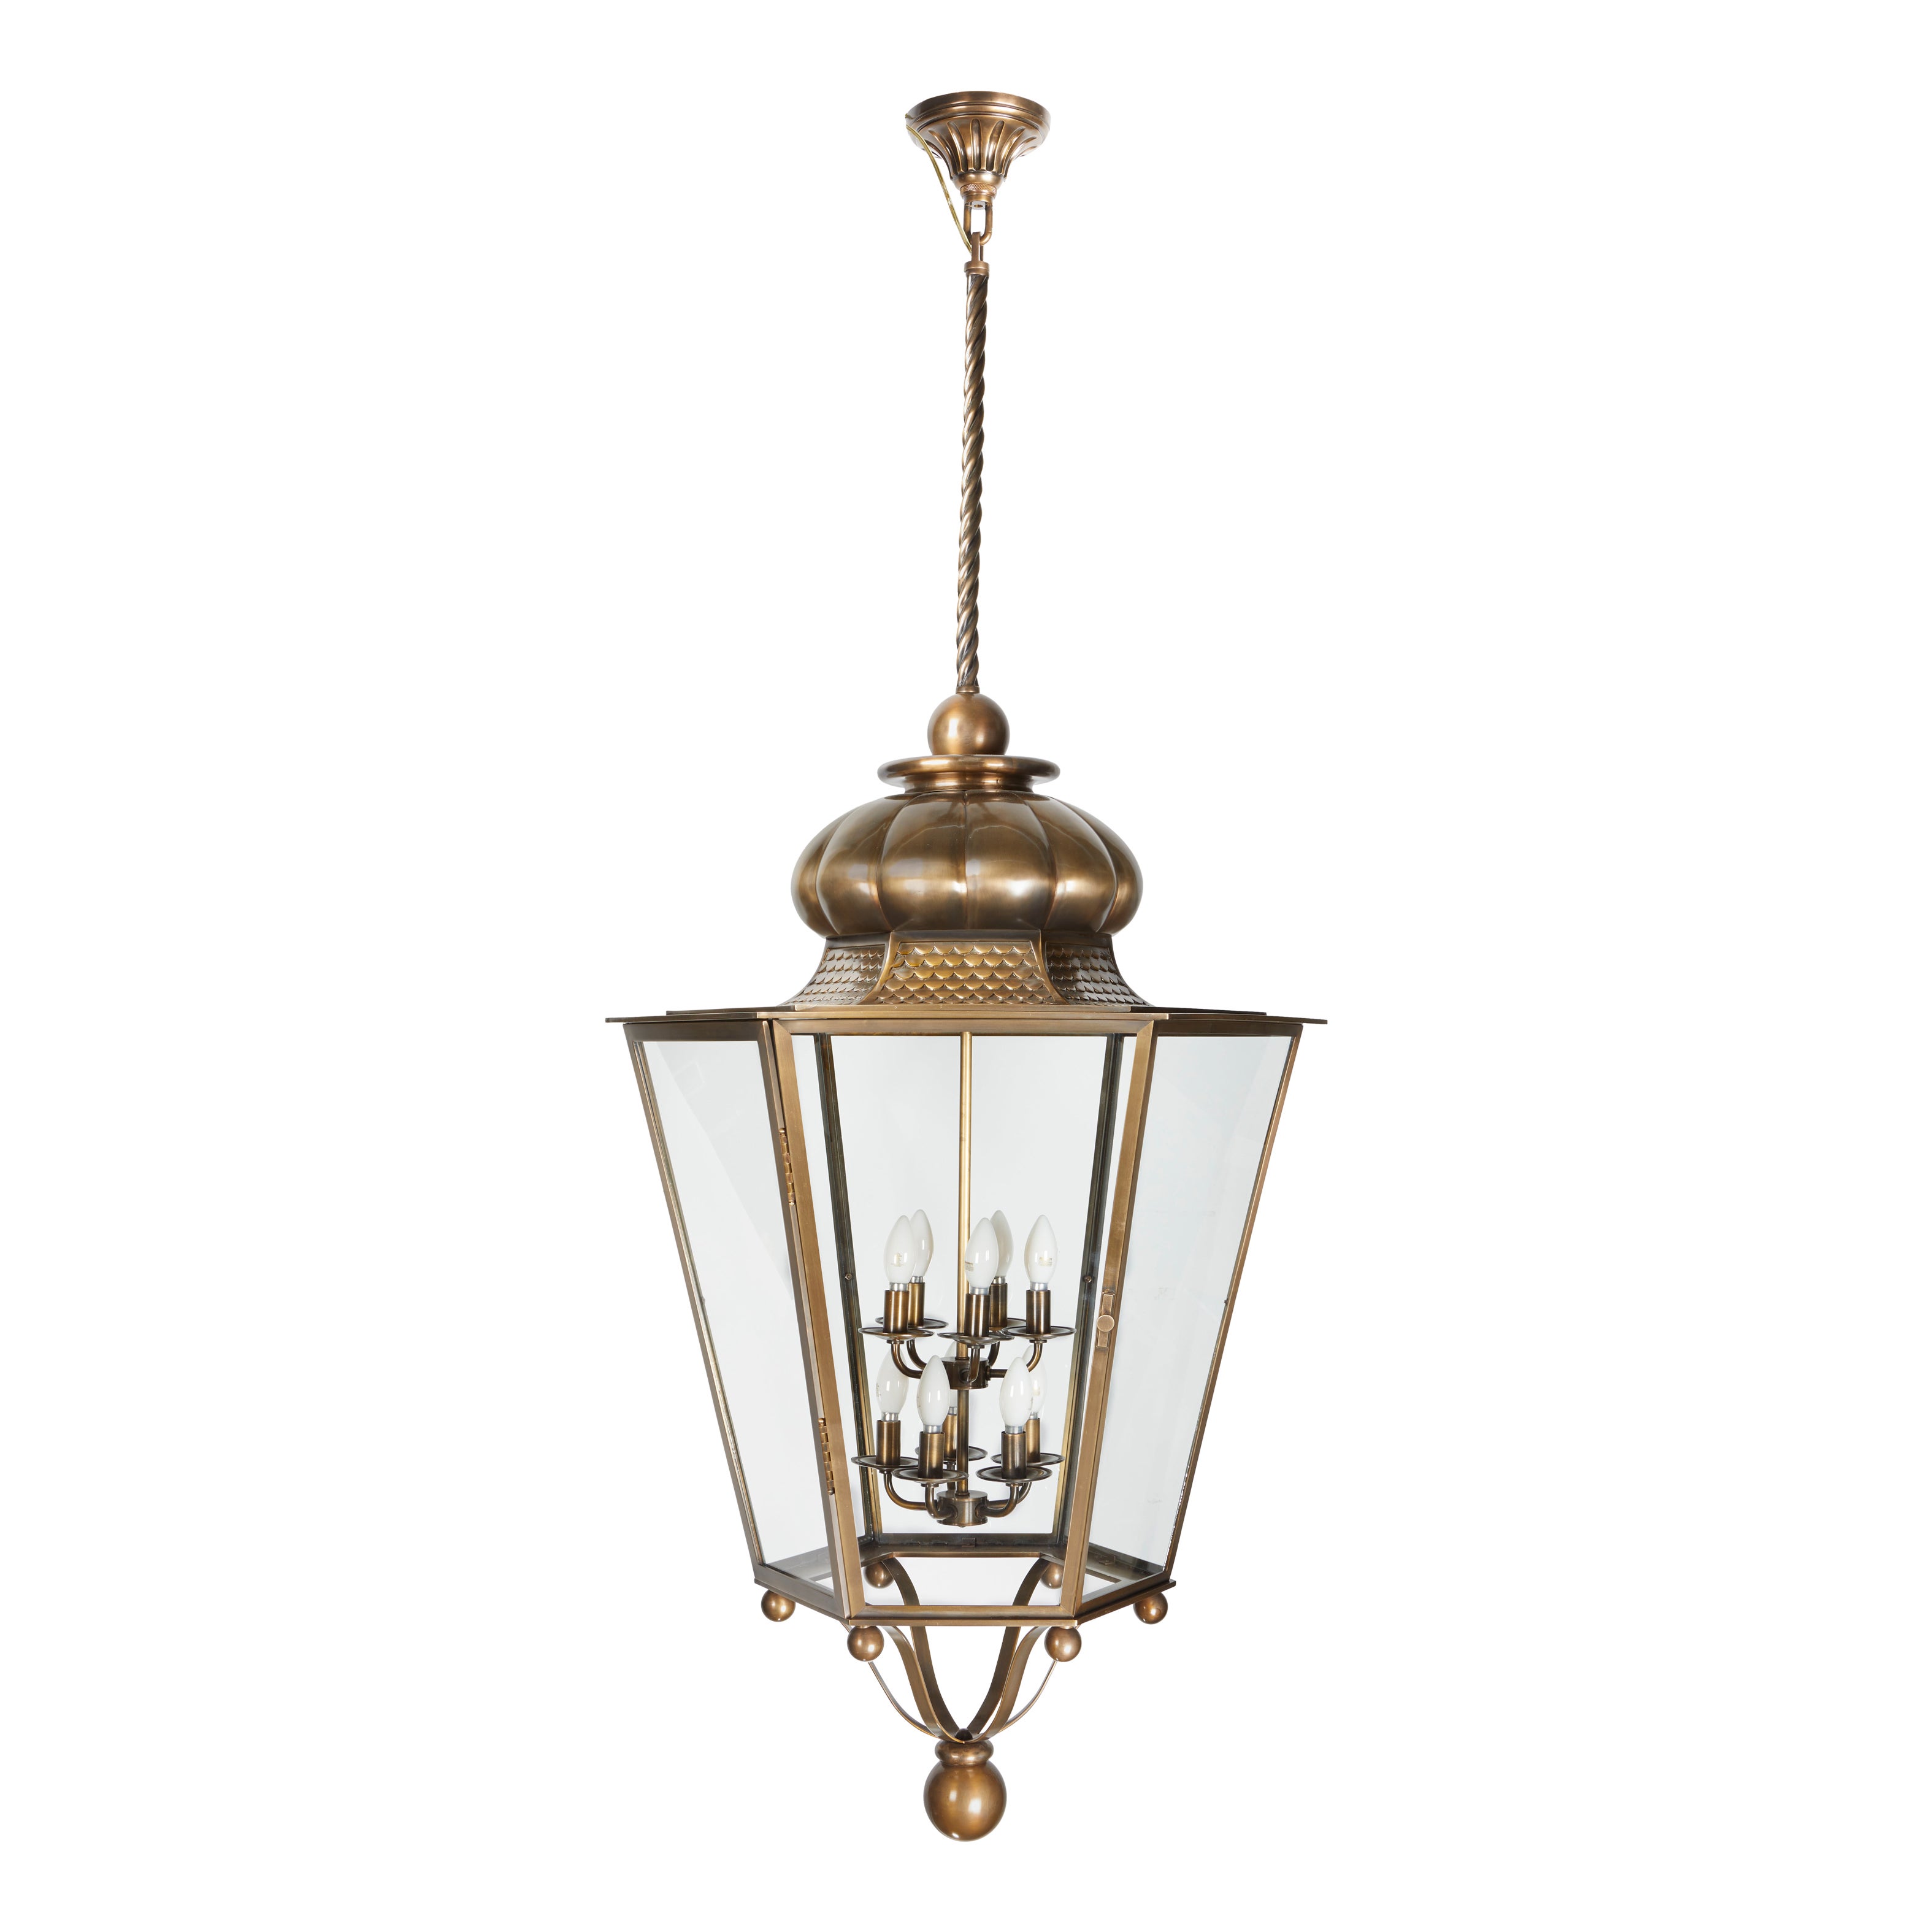 David Duncan Studio Cushing Lantern with Scalloped Roof For Sale